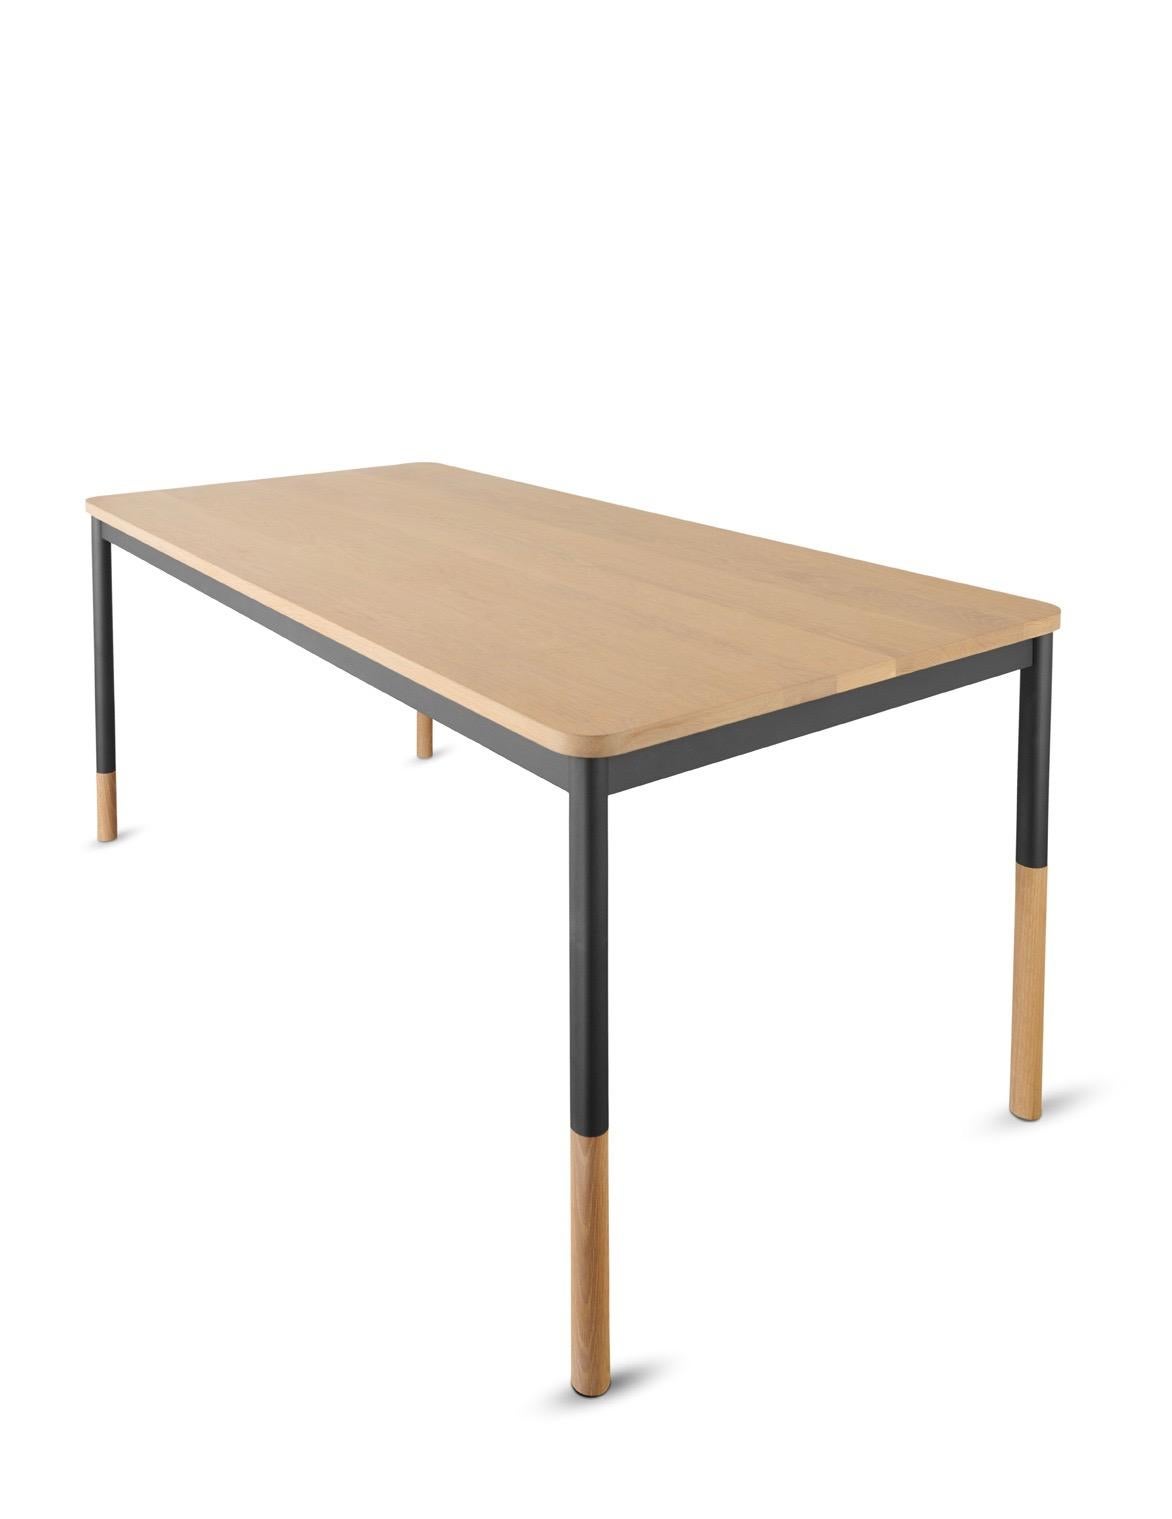 StaggerUp table with select white oak top and legs, steel apron and legs with charcoal 